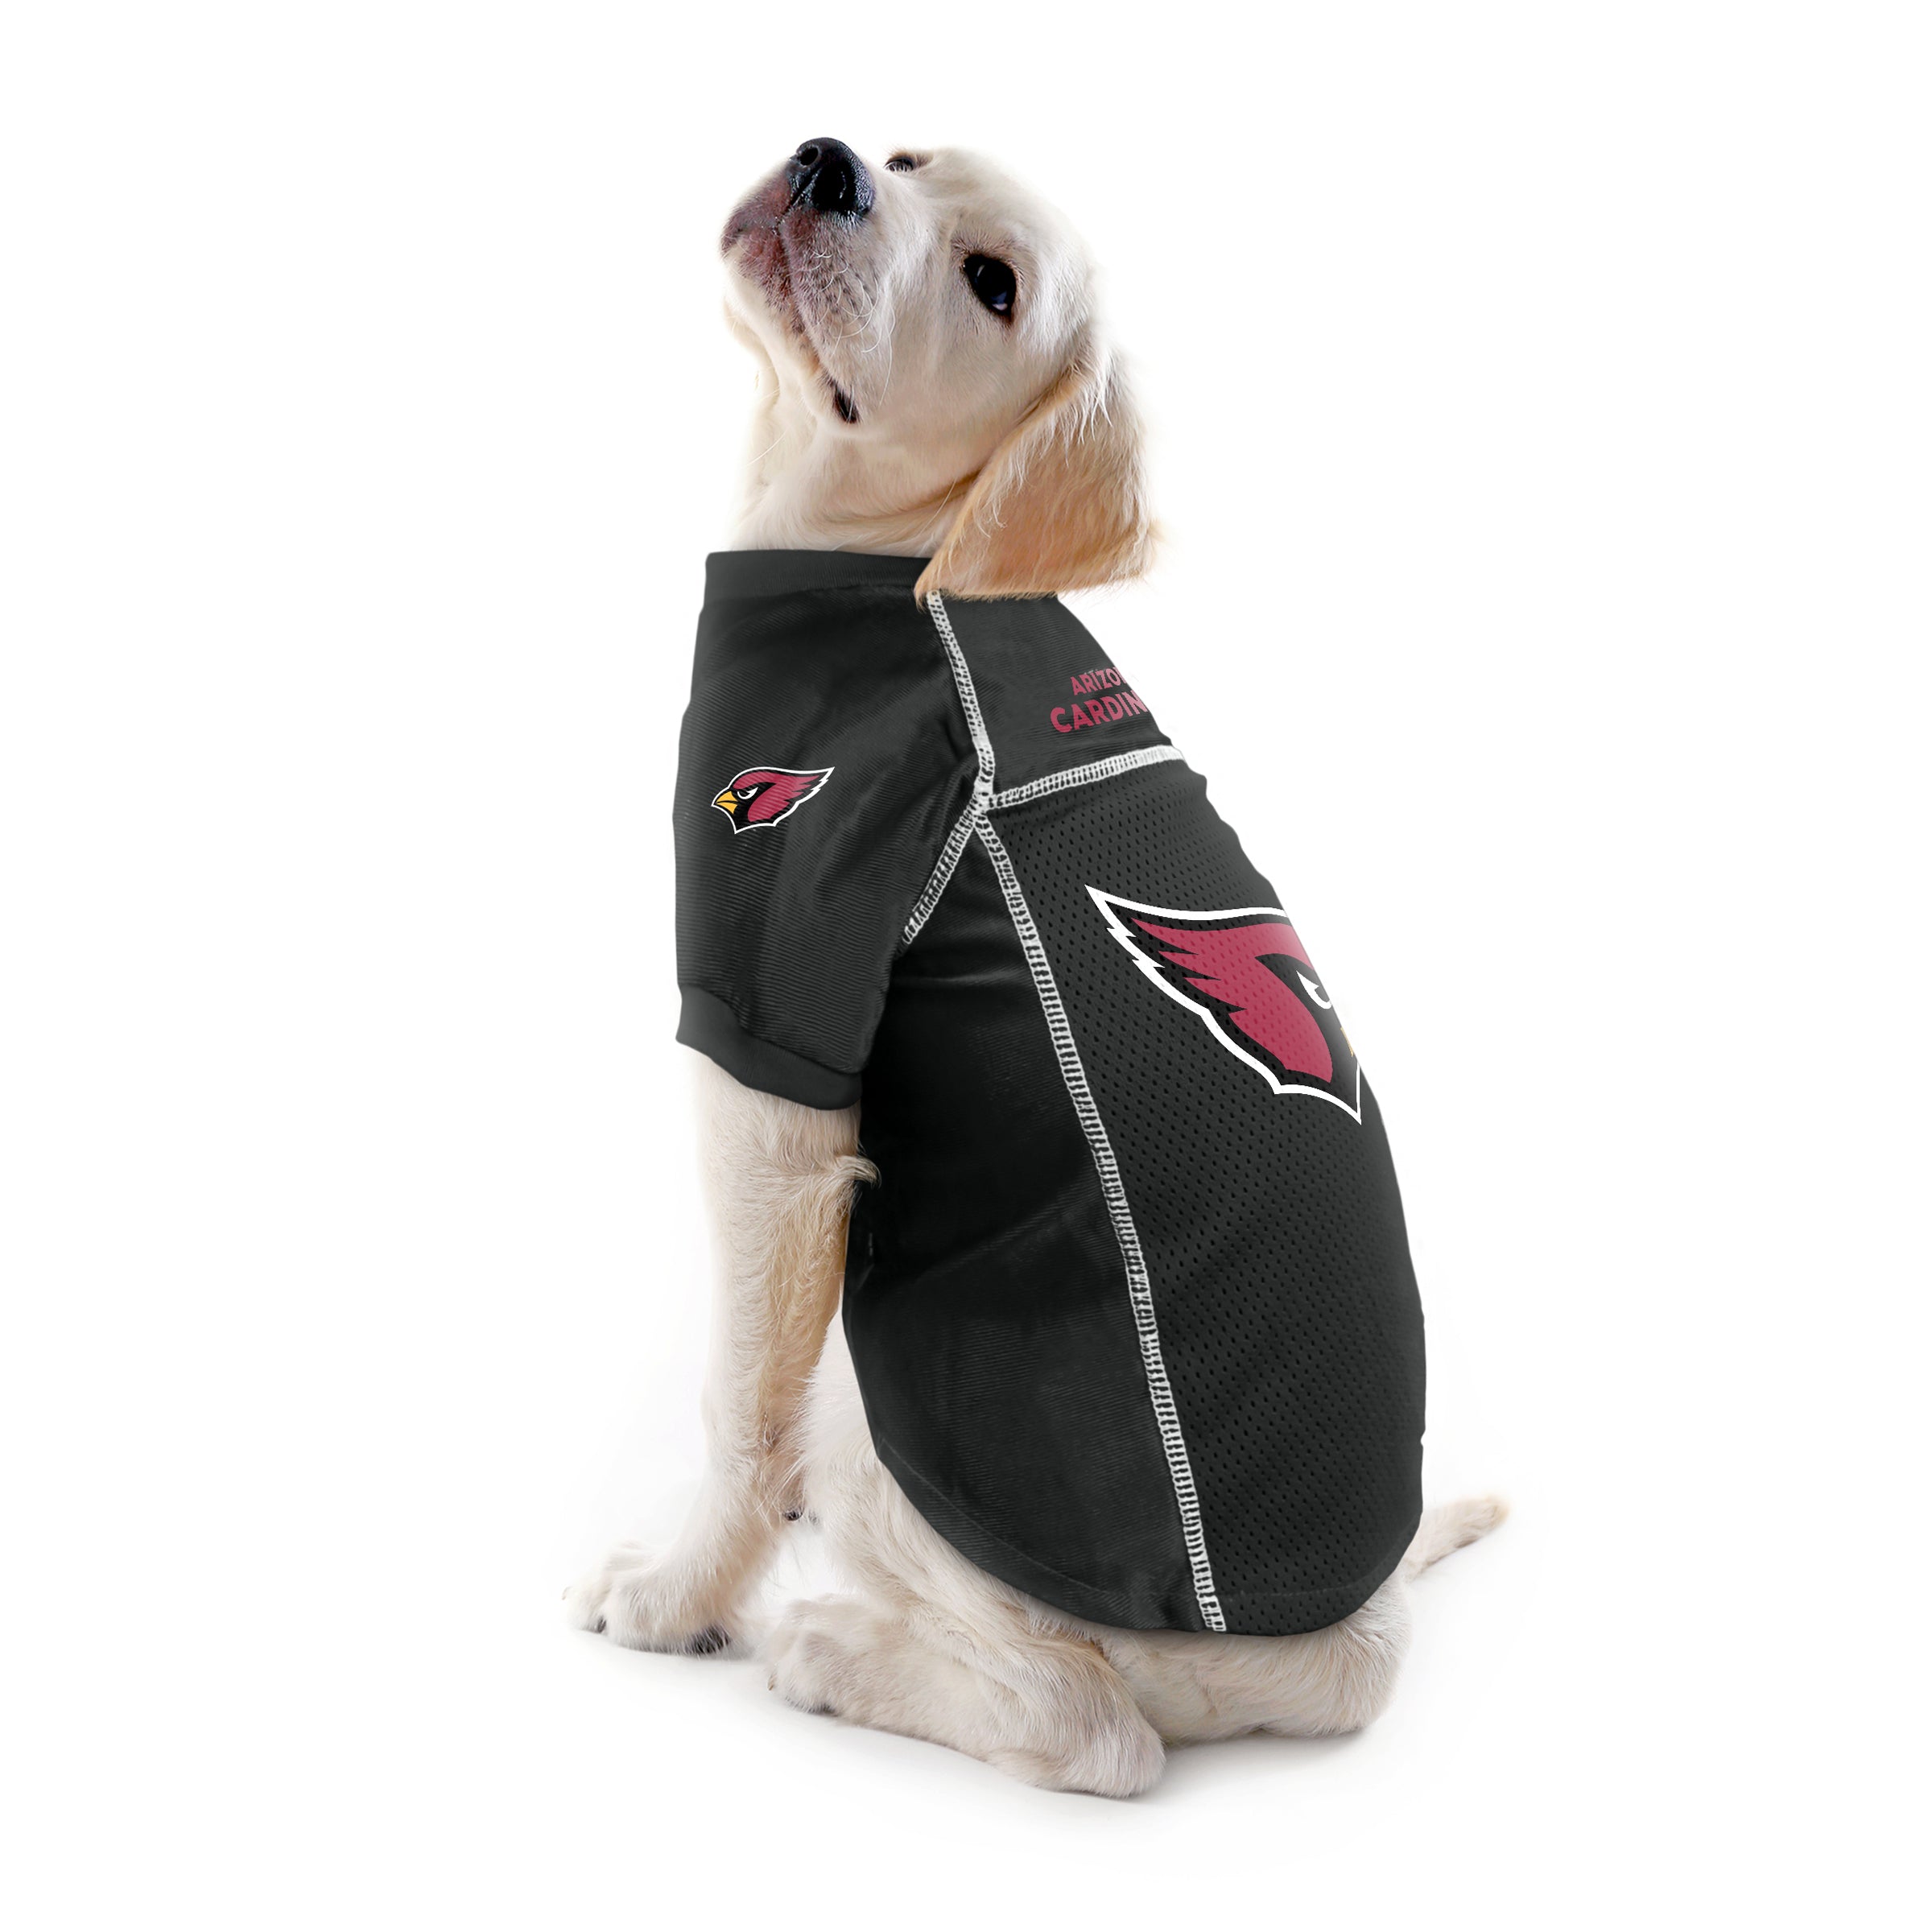 Pets First Arizona Coyotes Dog Jersey, X-Large